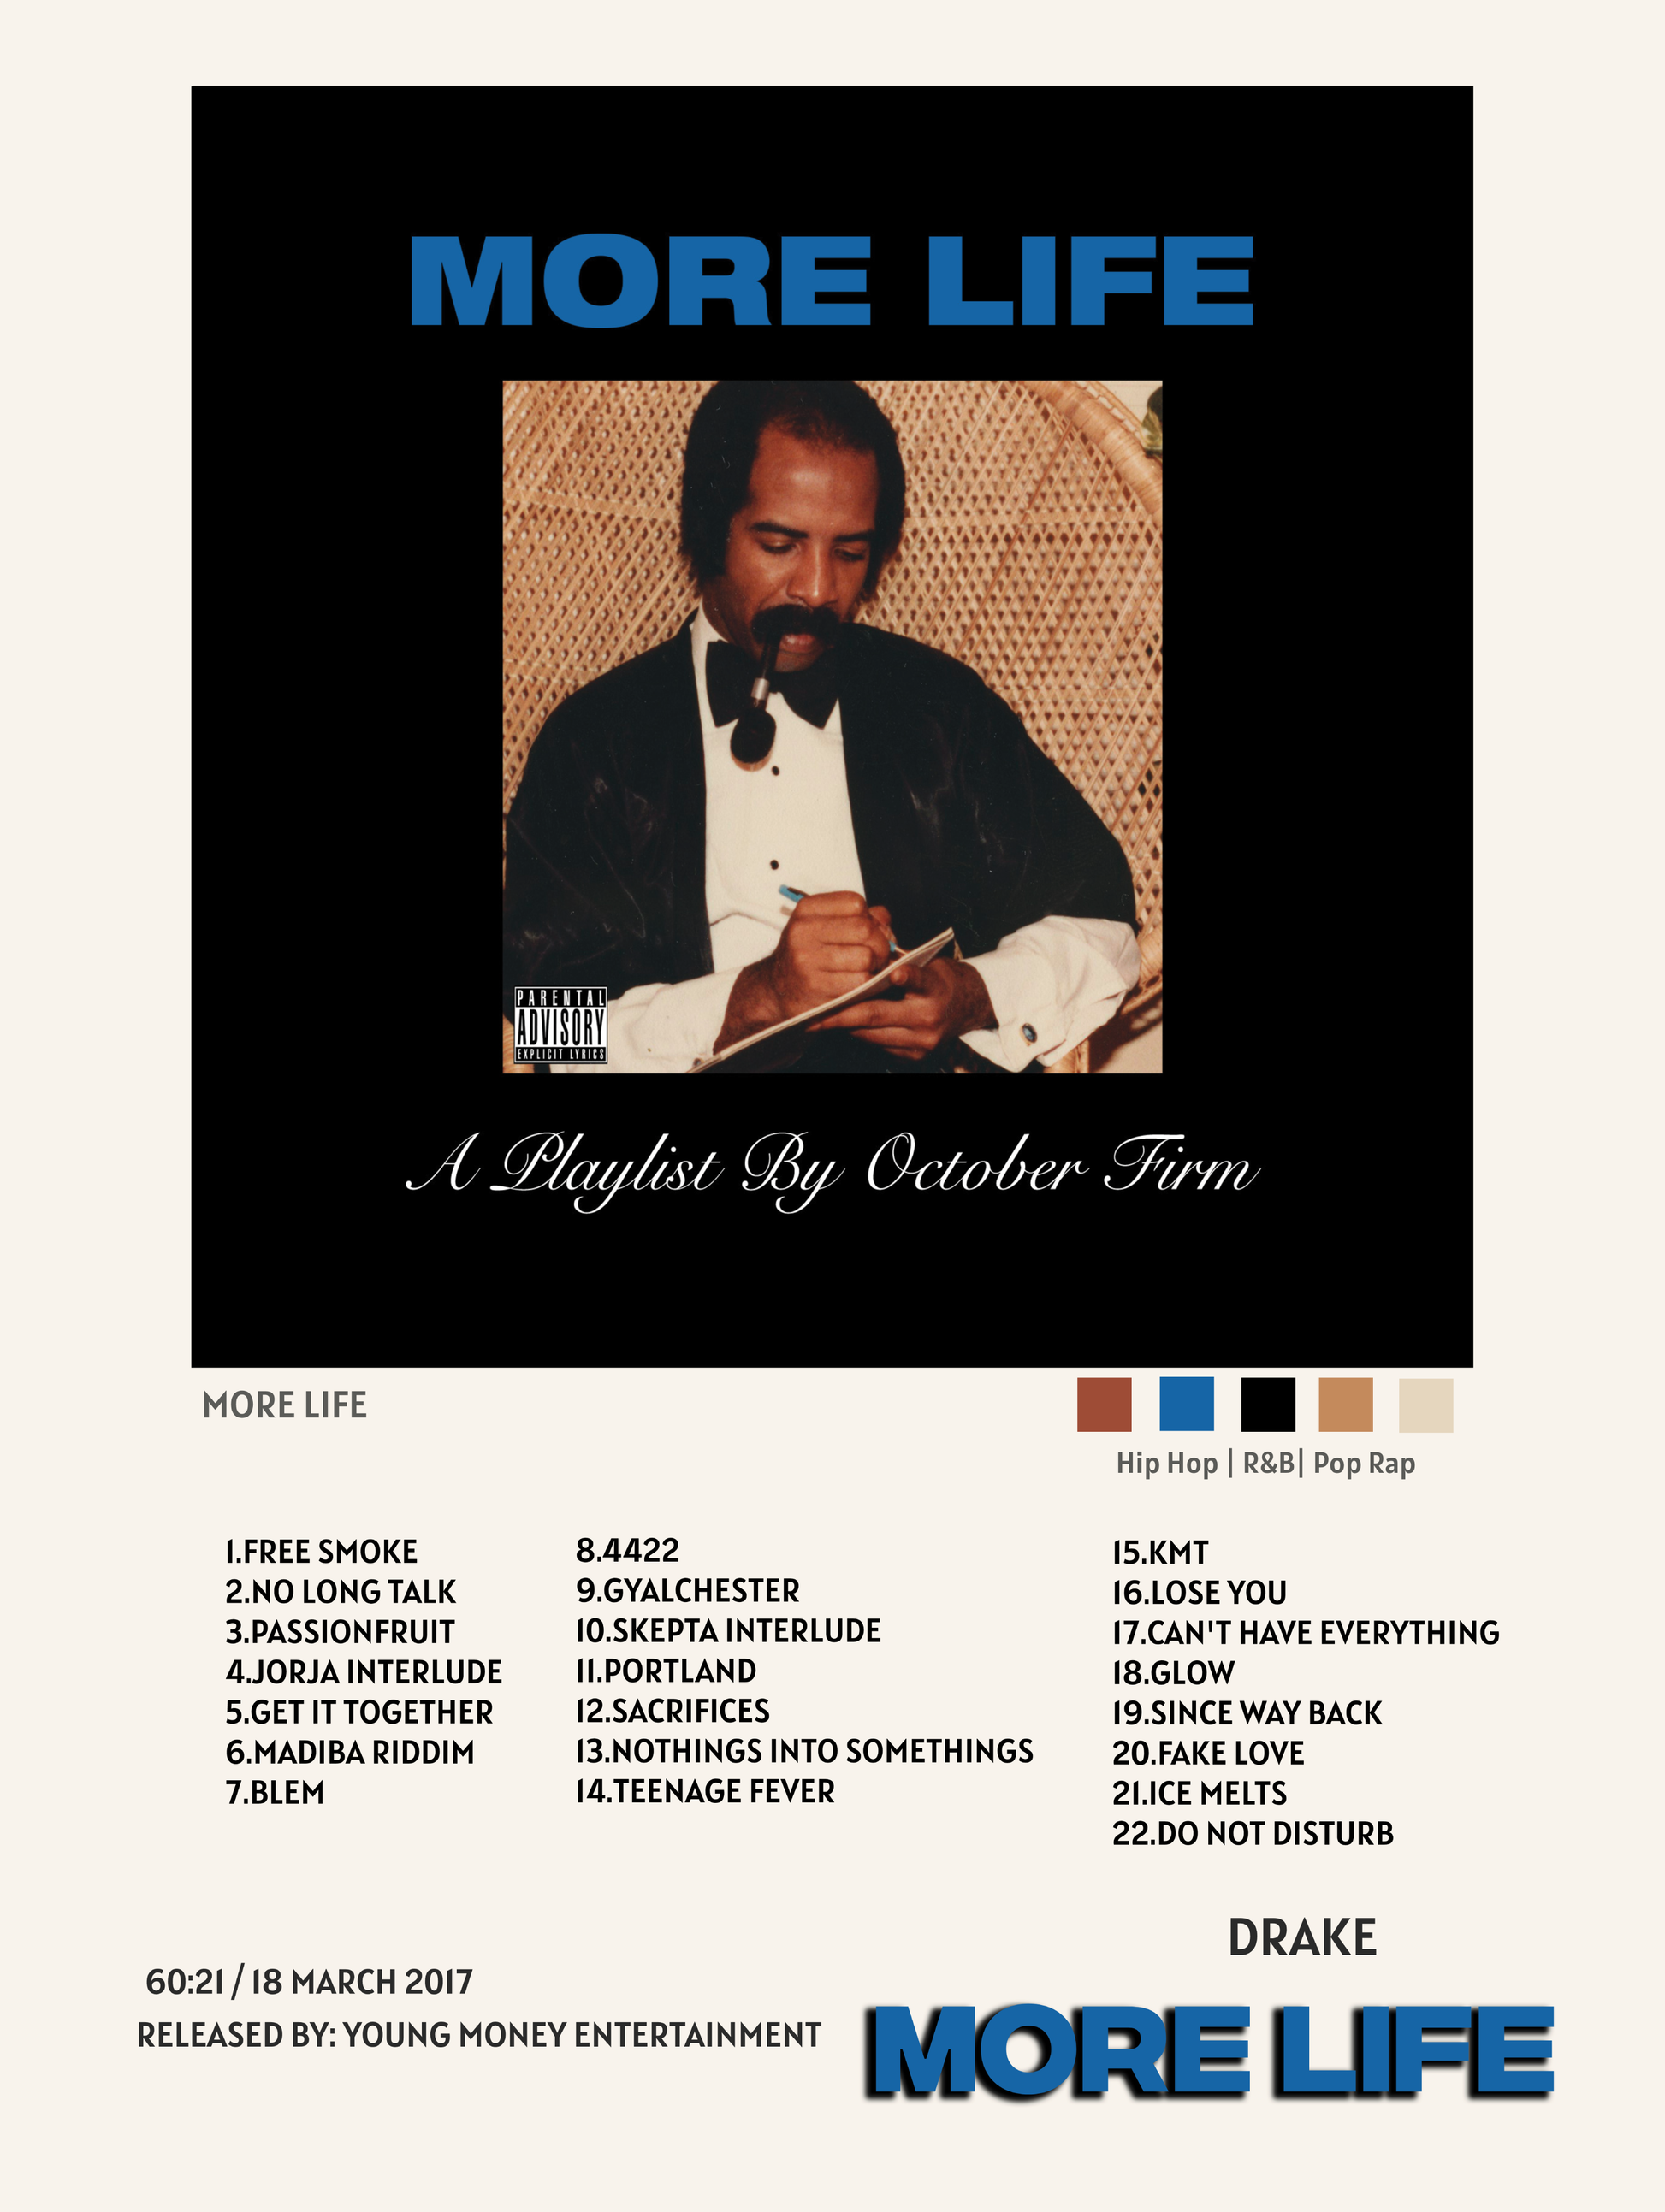 According 2 Hip-Hop - 4 years ago today Drake released“More Life”. What's  your favorite song from this album?